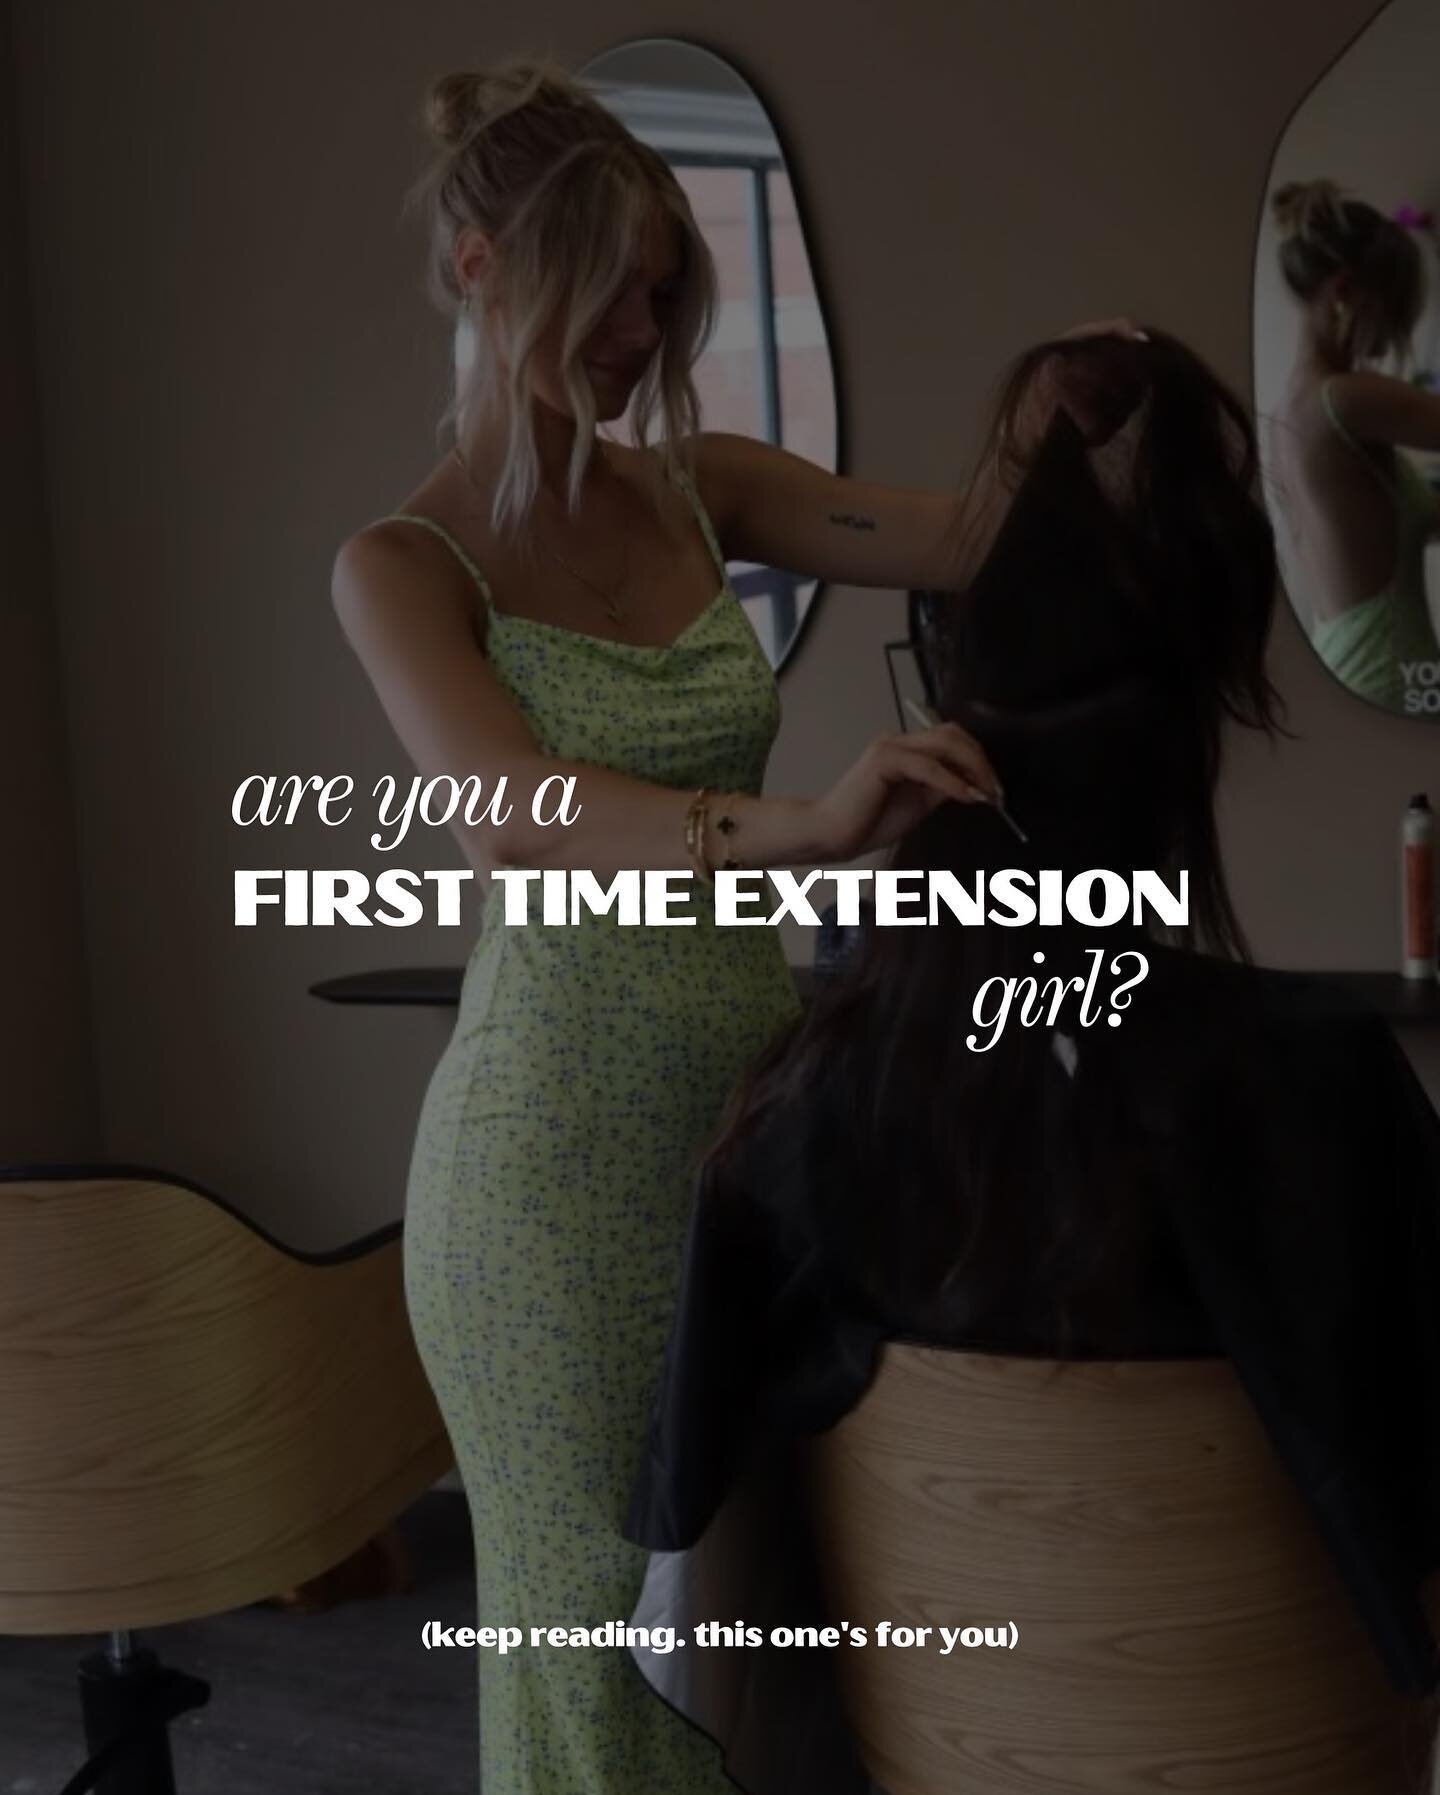 This one&rsquo;s for my first-time extension girls✨ If you&rsquo;ve been debating lengthening your locks, this is your chance. Today through the end of August, you will receive one free row with your first purchase of extension hair. 

Book a consult